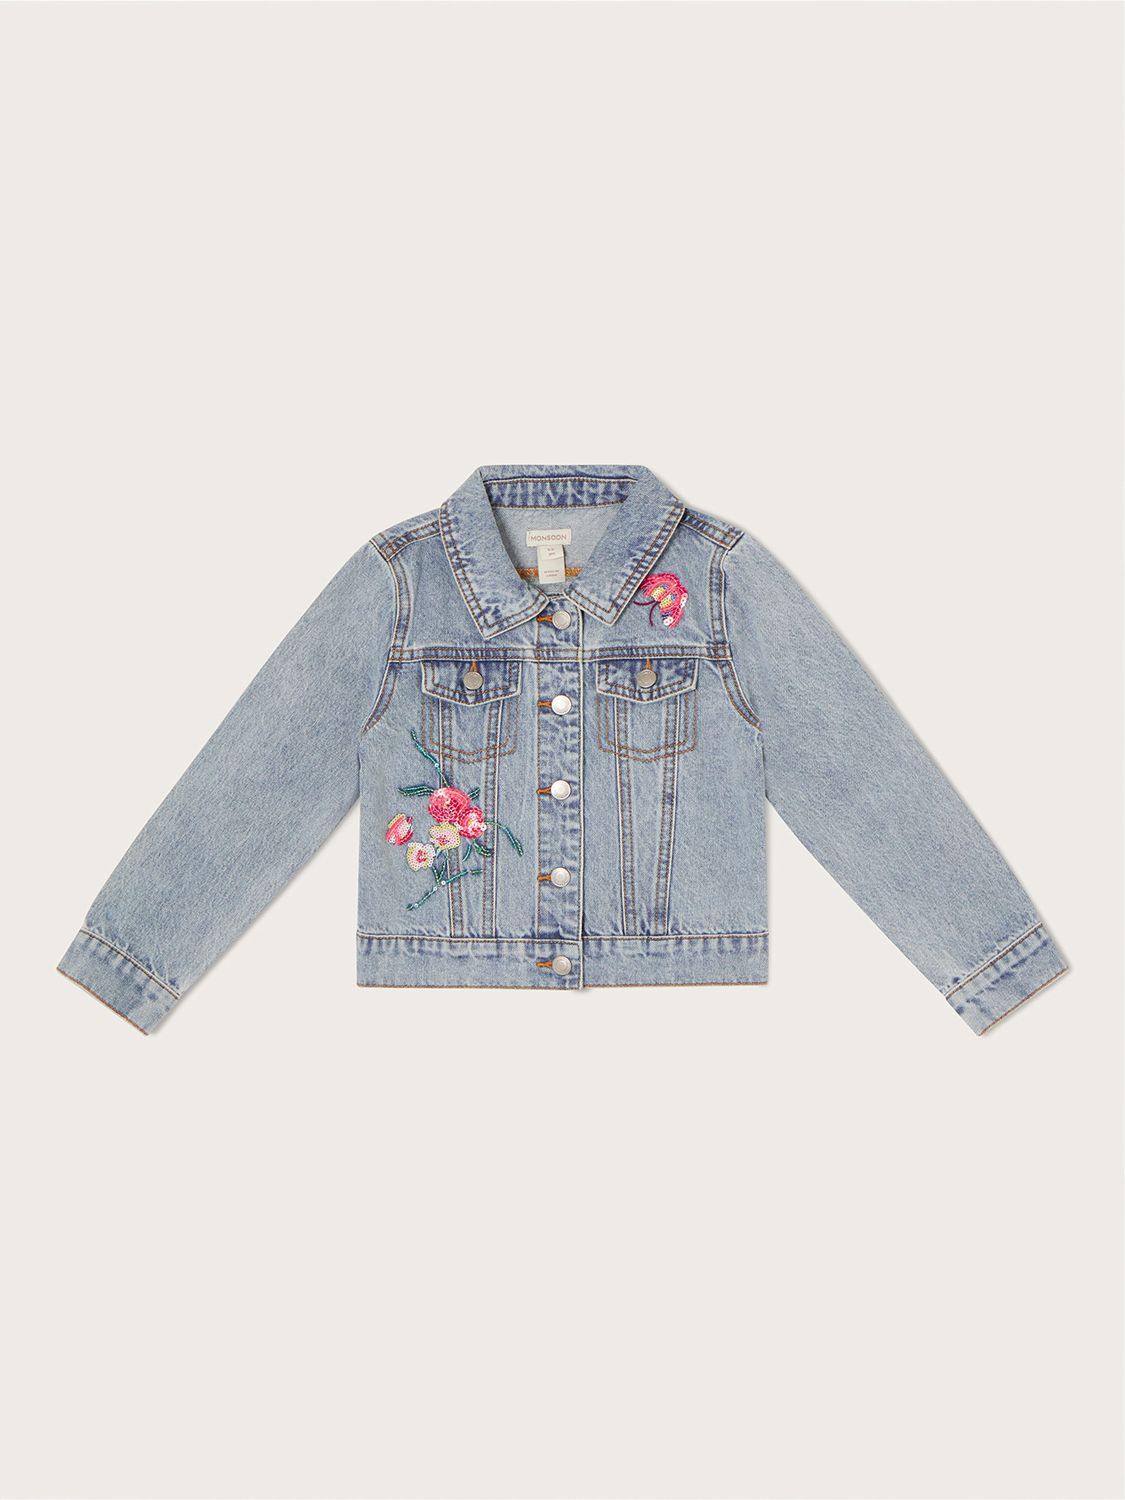 Womens Floral Embroidered Denim Jacket, UK Sizes 6 to 14